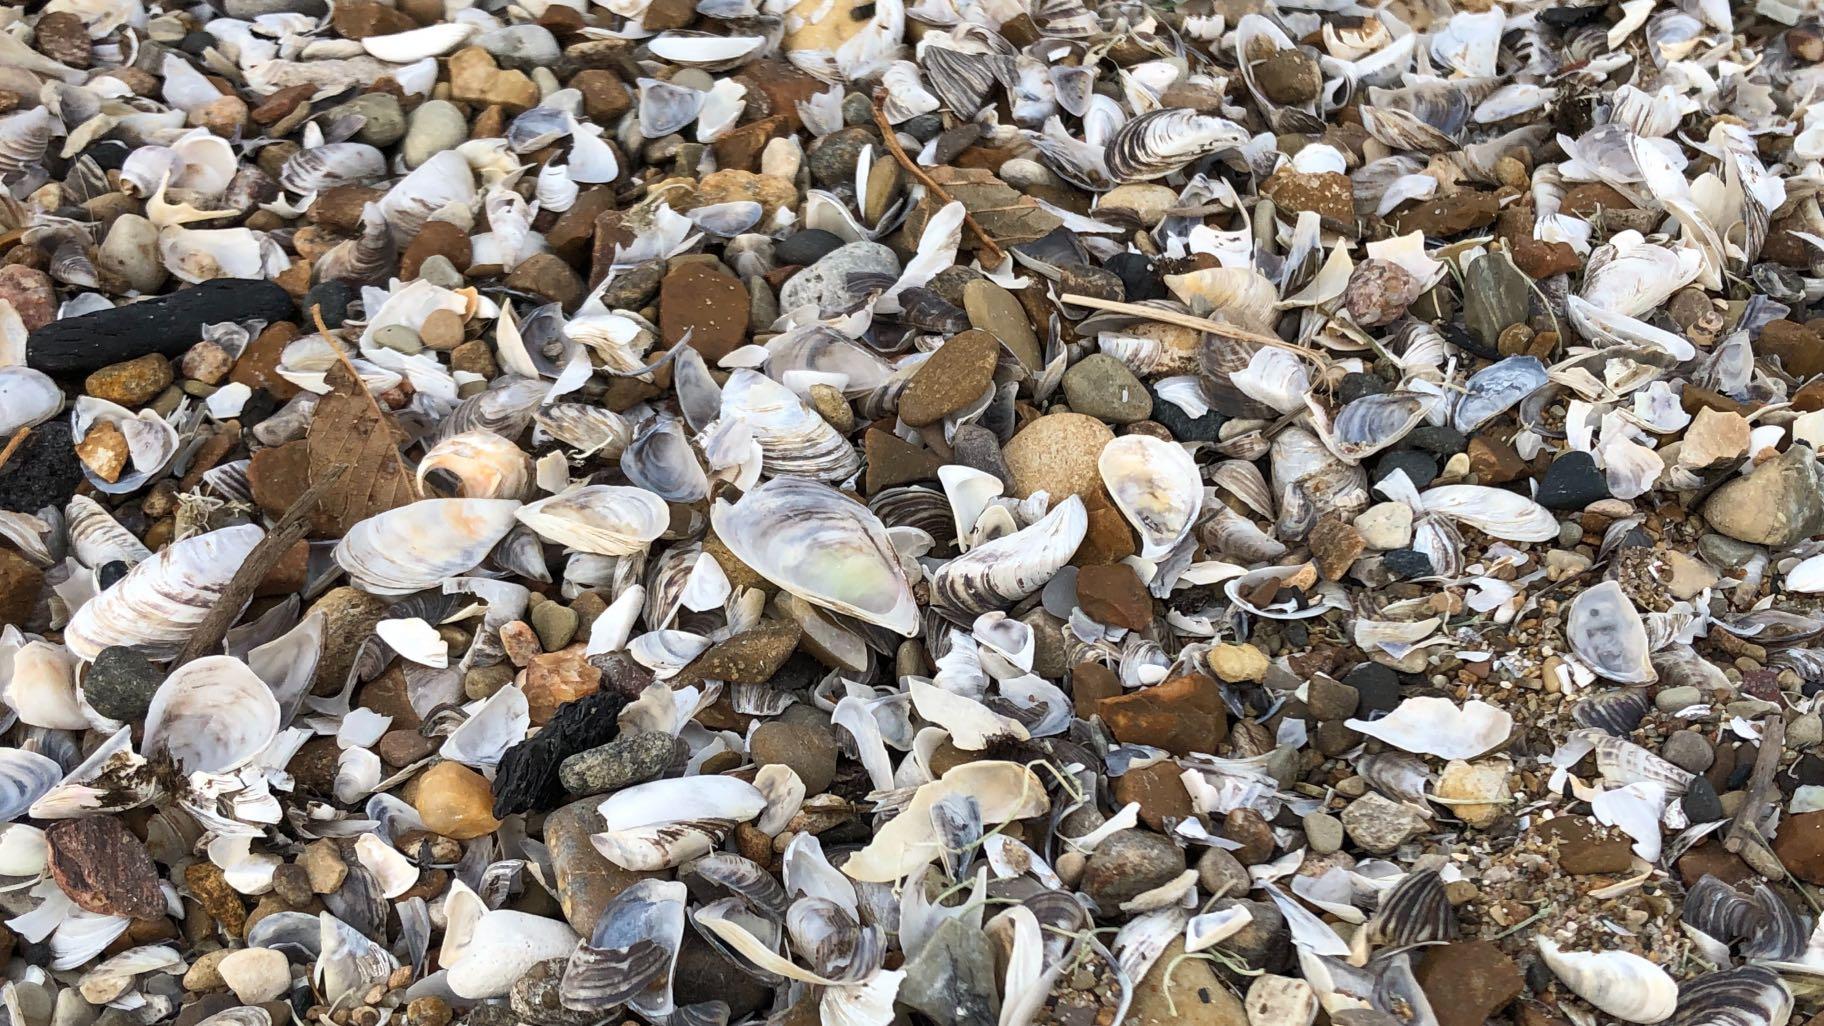 A large deposit of seashells washed up on Lane Beach in Edgewater.  (Patty Wetli / WTTW News)